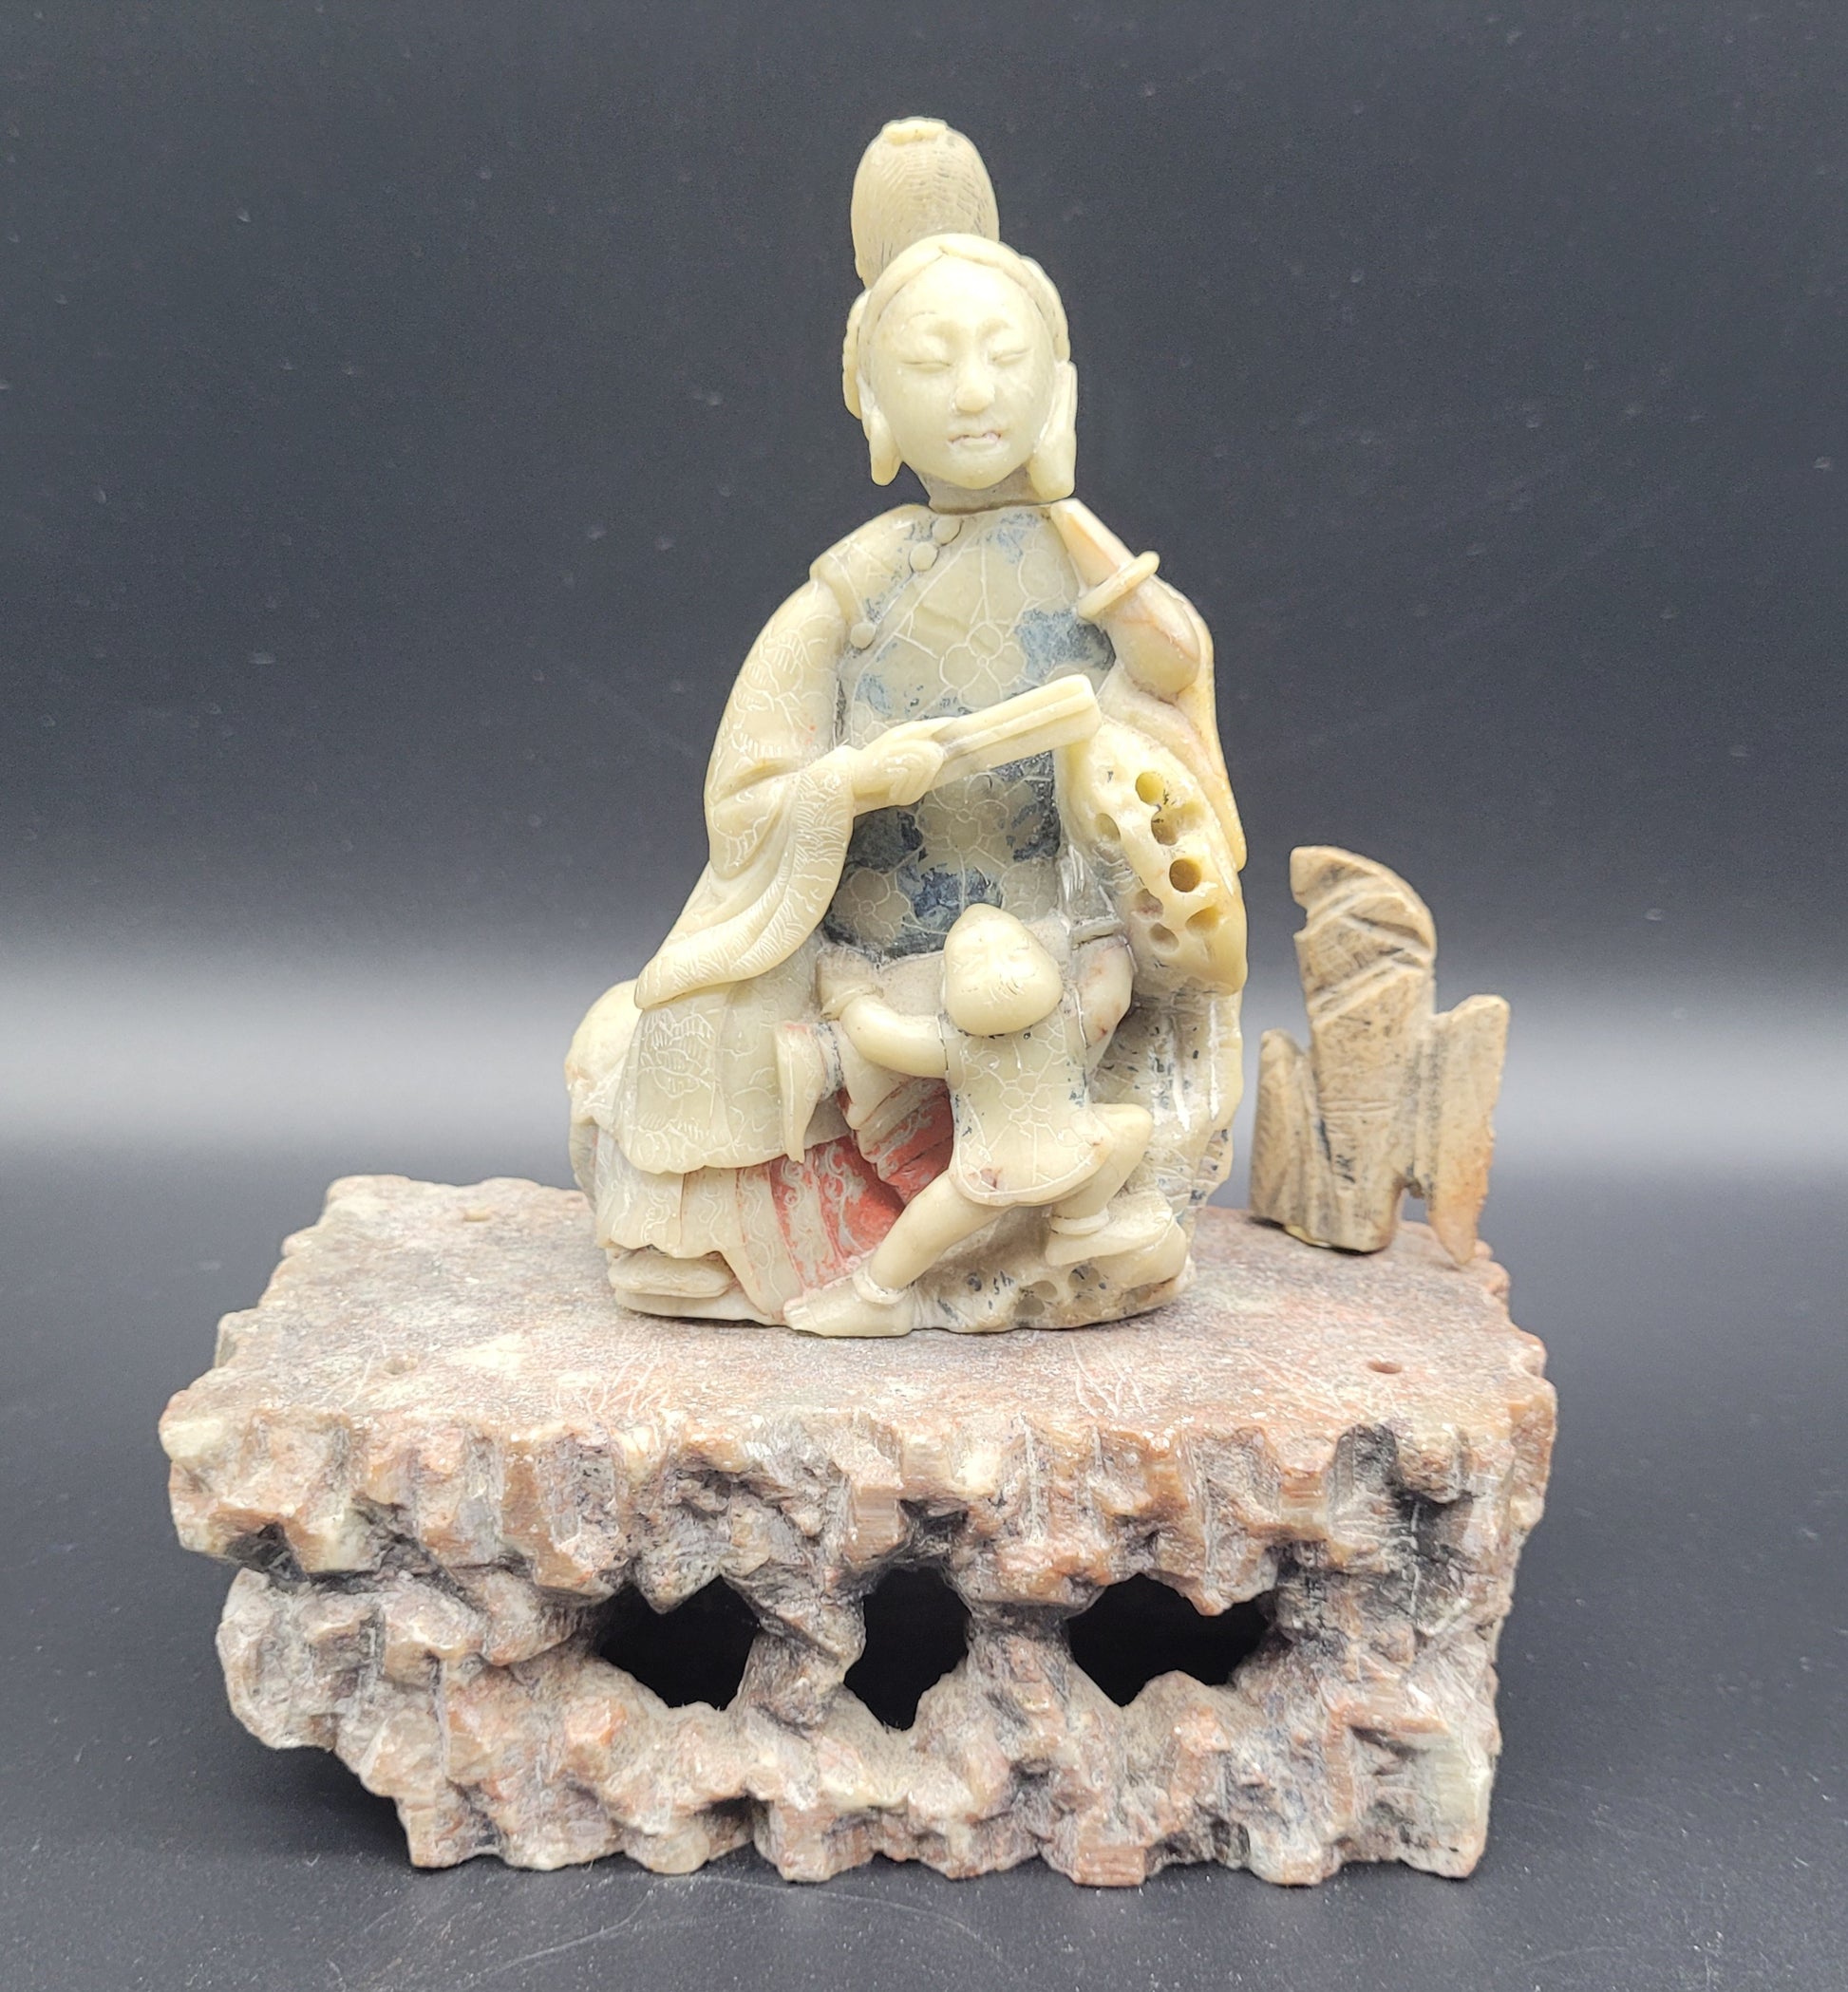 Antique Chinese Soap Stone Buddha Carving Figure 19th Century